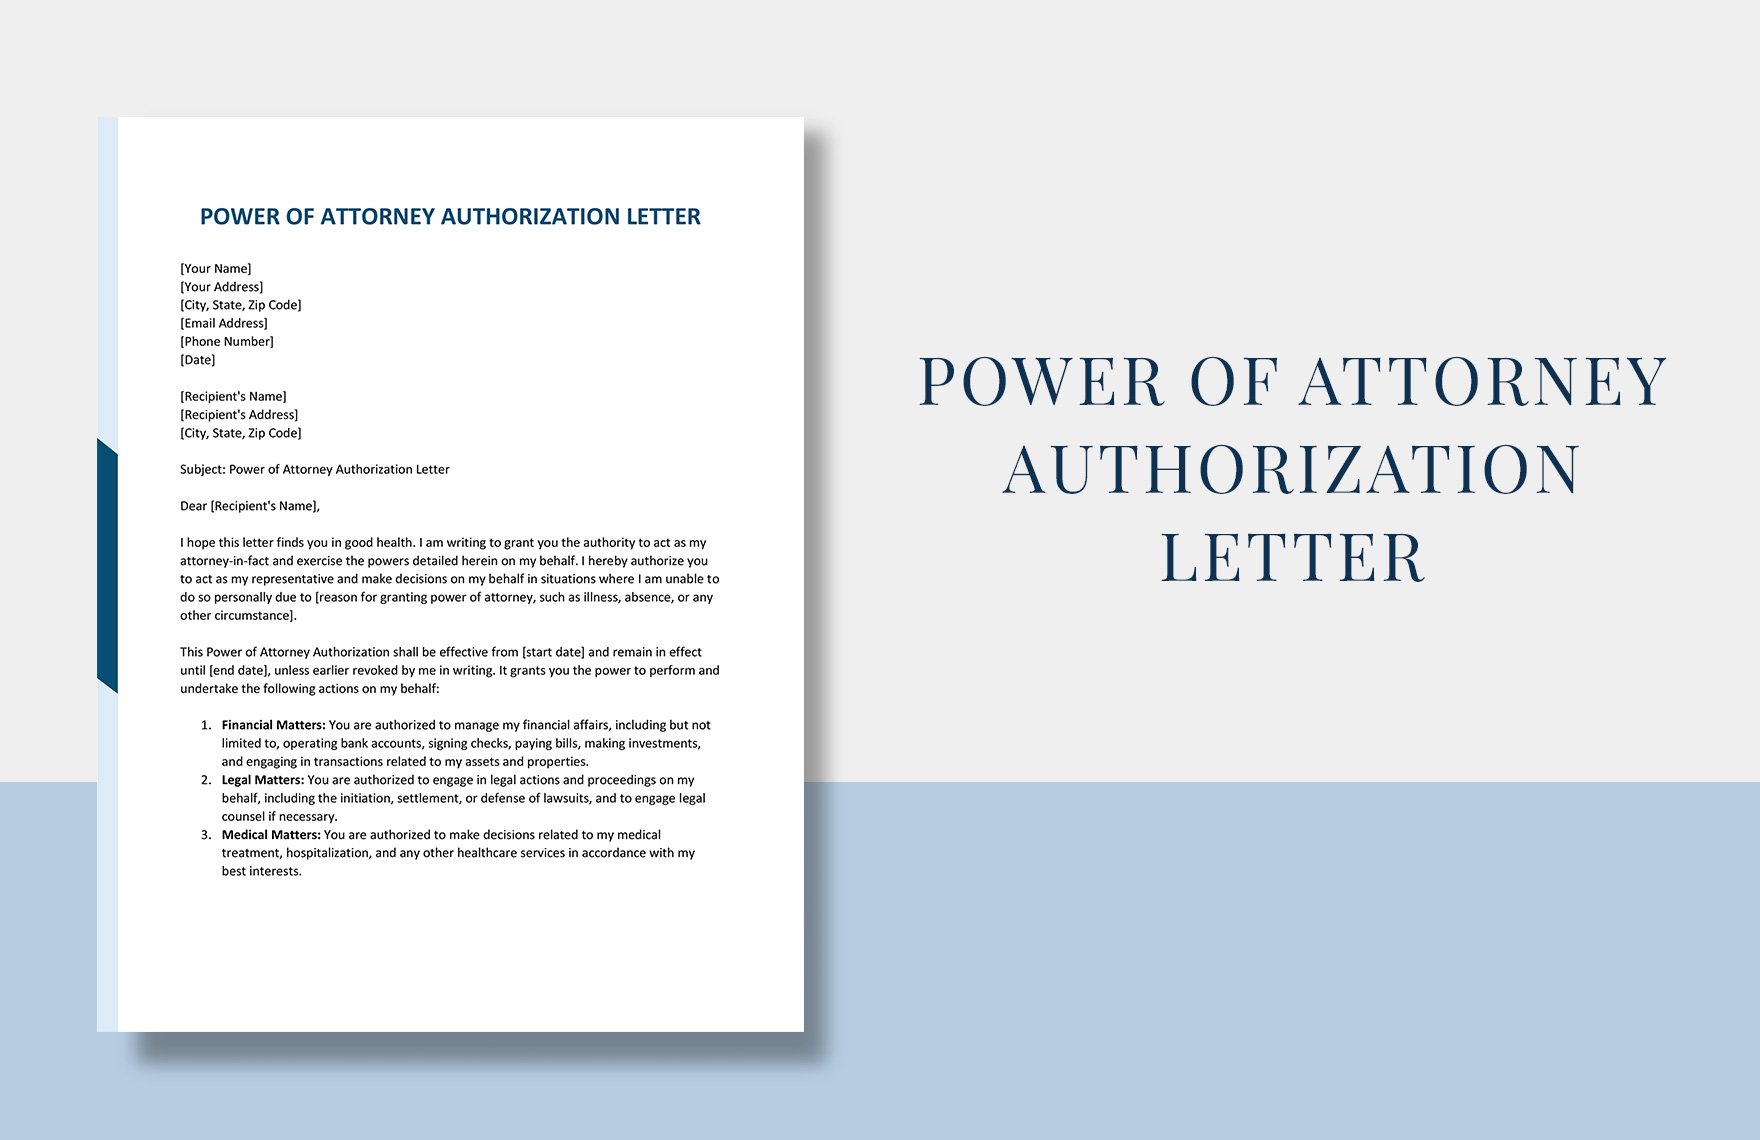 Power of Attorney Authorization Letter Template in Word, Google Docs, Apple Pages